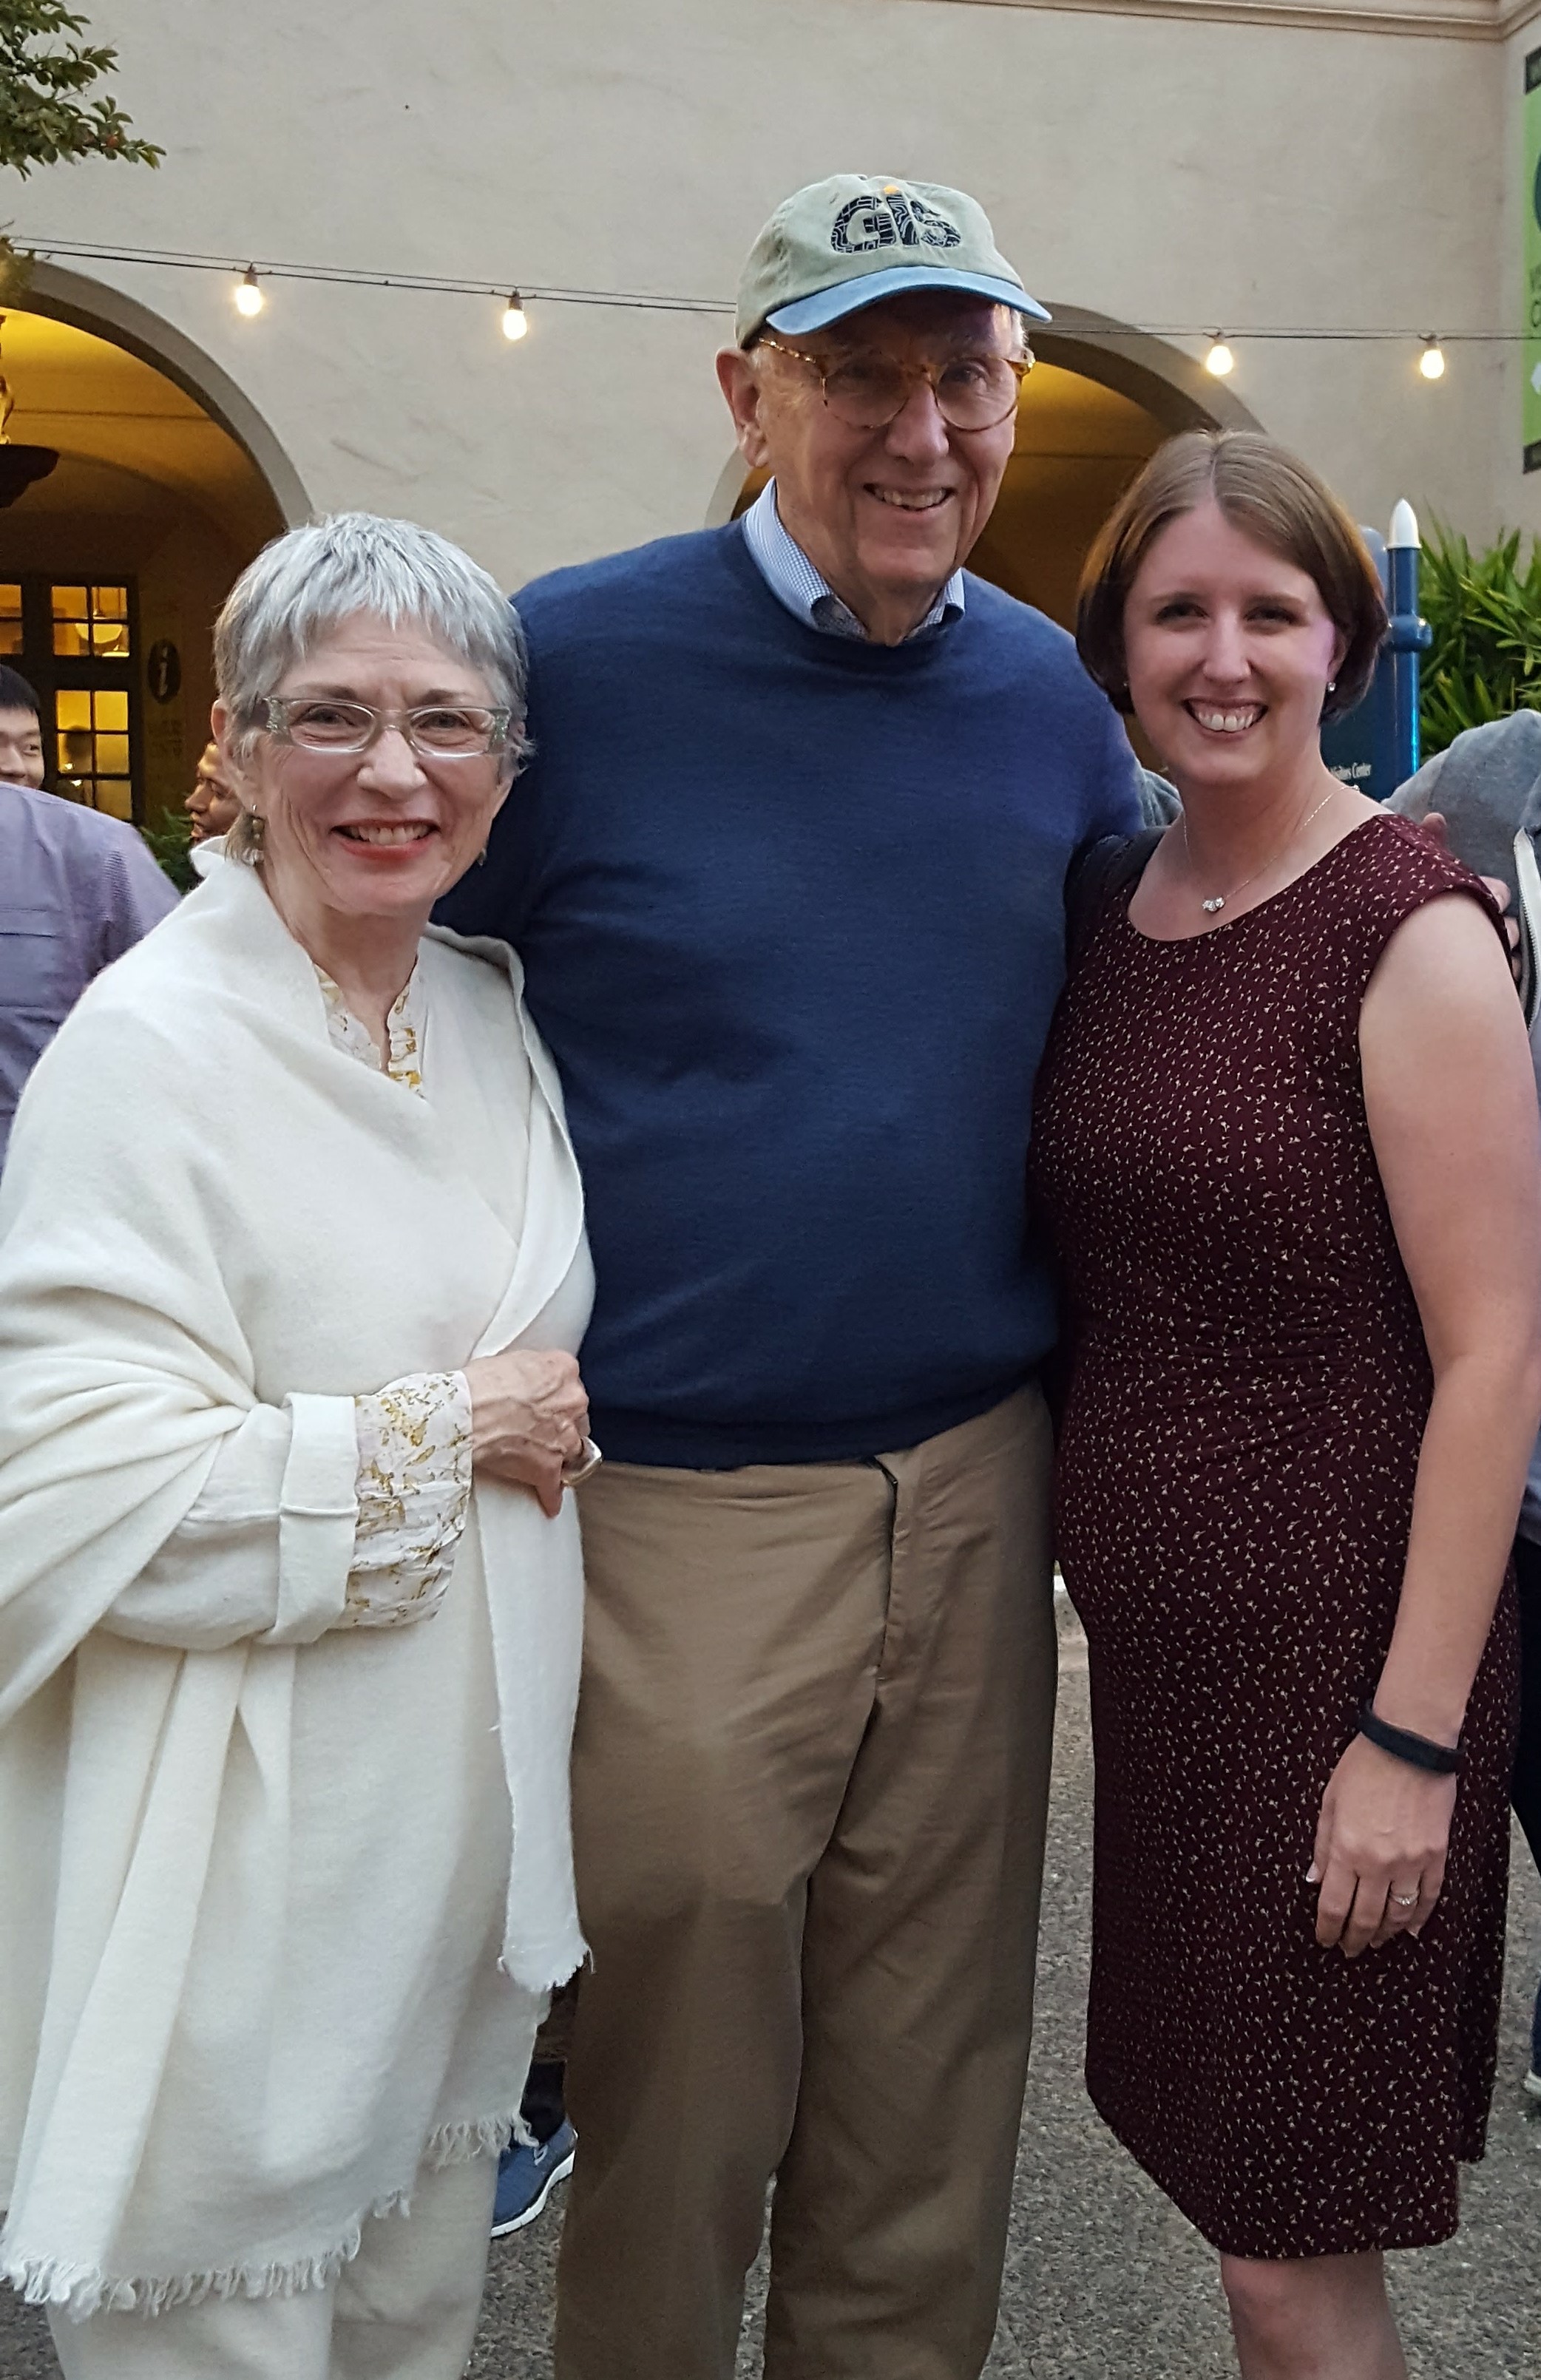 Amy Roust, right, met Esri founder and president Jack Dangermond and his wife, Laura back in 2016. She ran into them at Balboa Park in San Diego while attending the Esri User Conference for work.